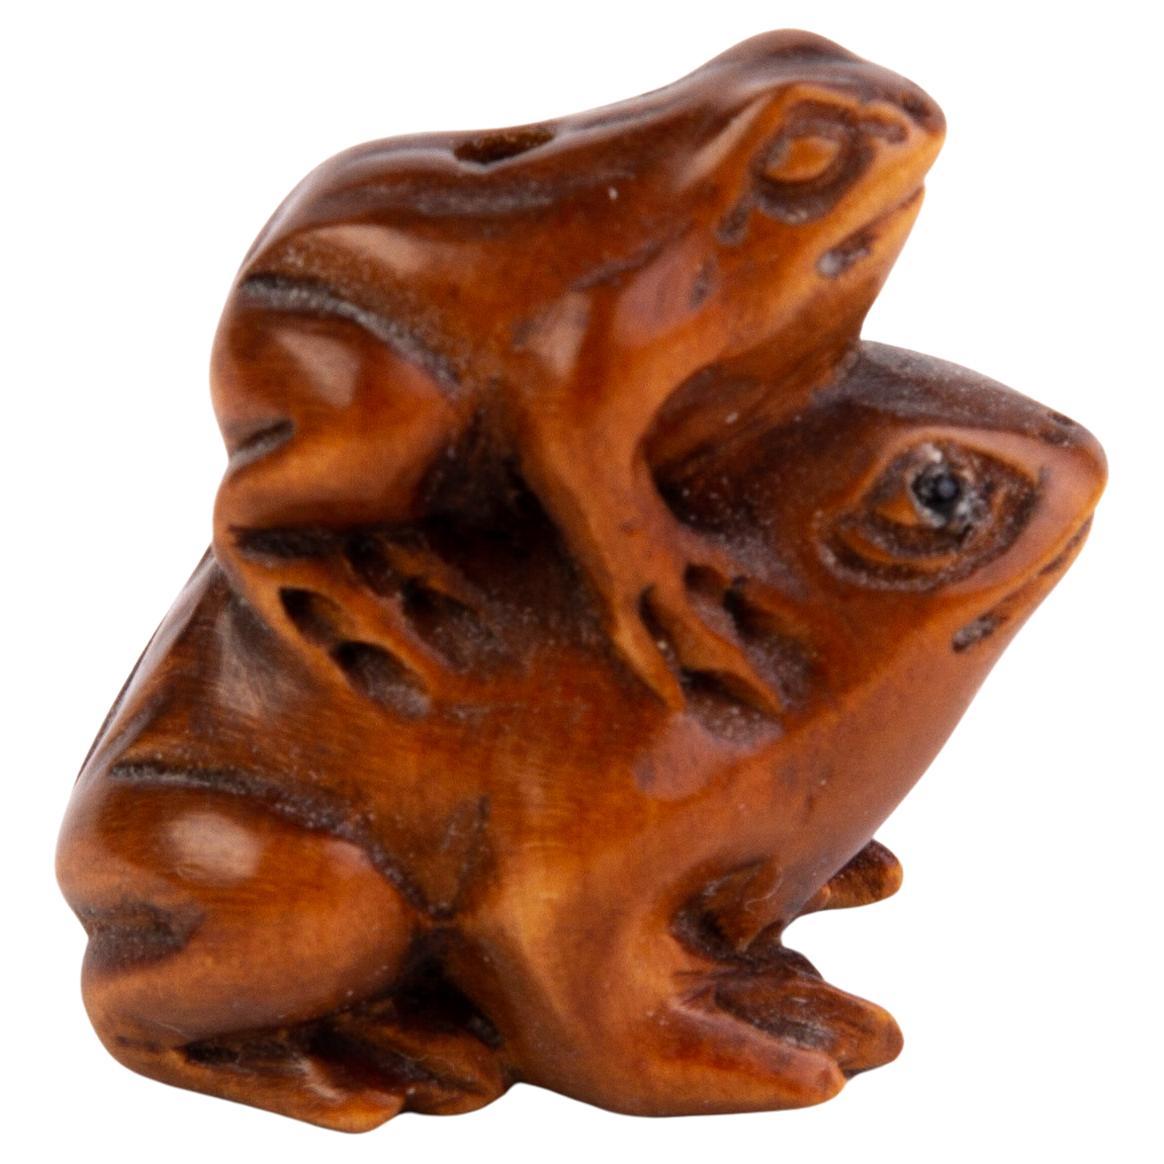 Signed Japanese Carved Wood Netsuke Inro Frogs